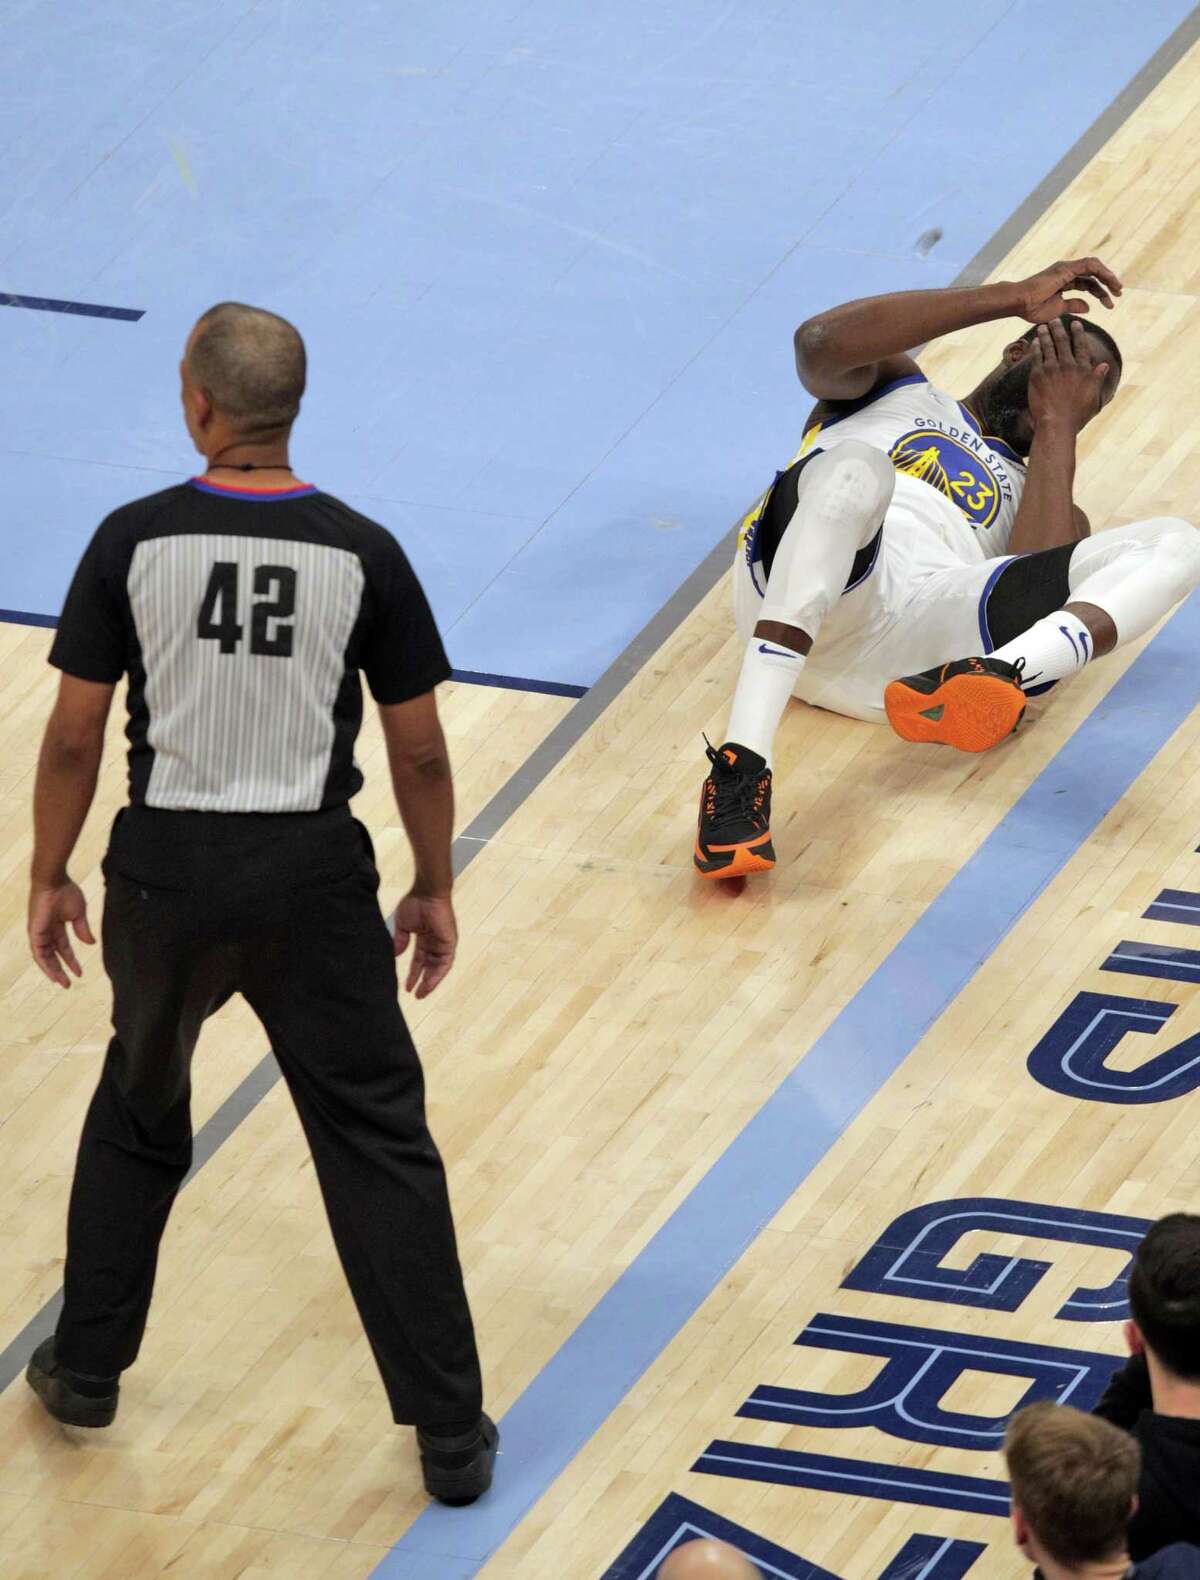 Draymond Green (23) lies on the floor after being hit in the eye In the first quarter as the Golden State Warriors played the Memphis Grizzlies in Game 2 of the second round of the NBA Playoffs at Fedex Forum in Memphis, Tenn., on Tuesday, May 3, 2022.